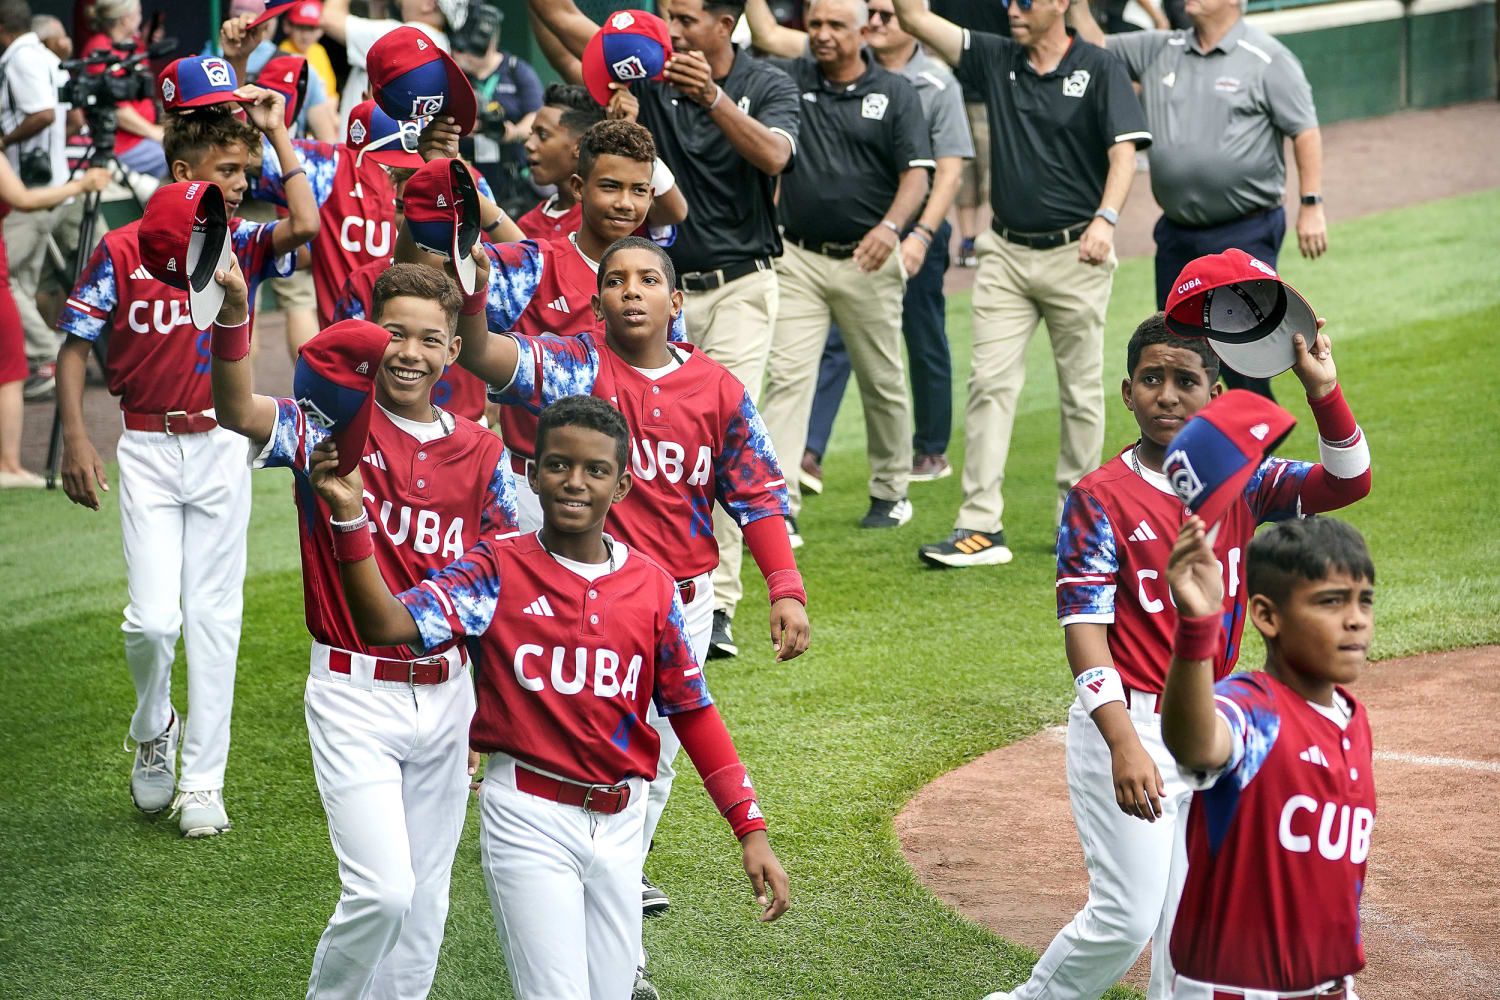 20 years ago, they were Little League World Series champs. Where are they  now? 